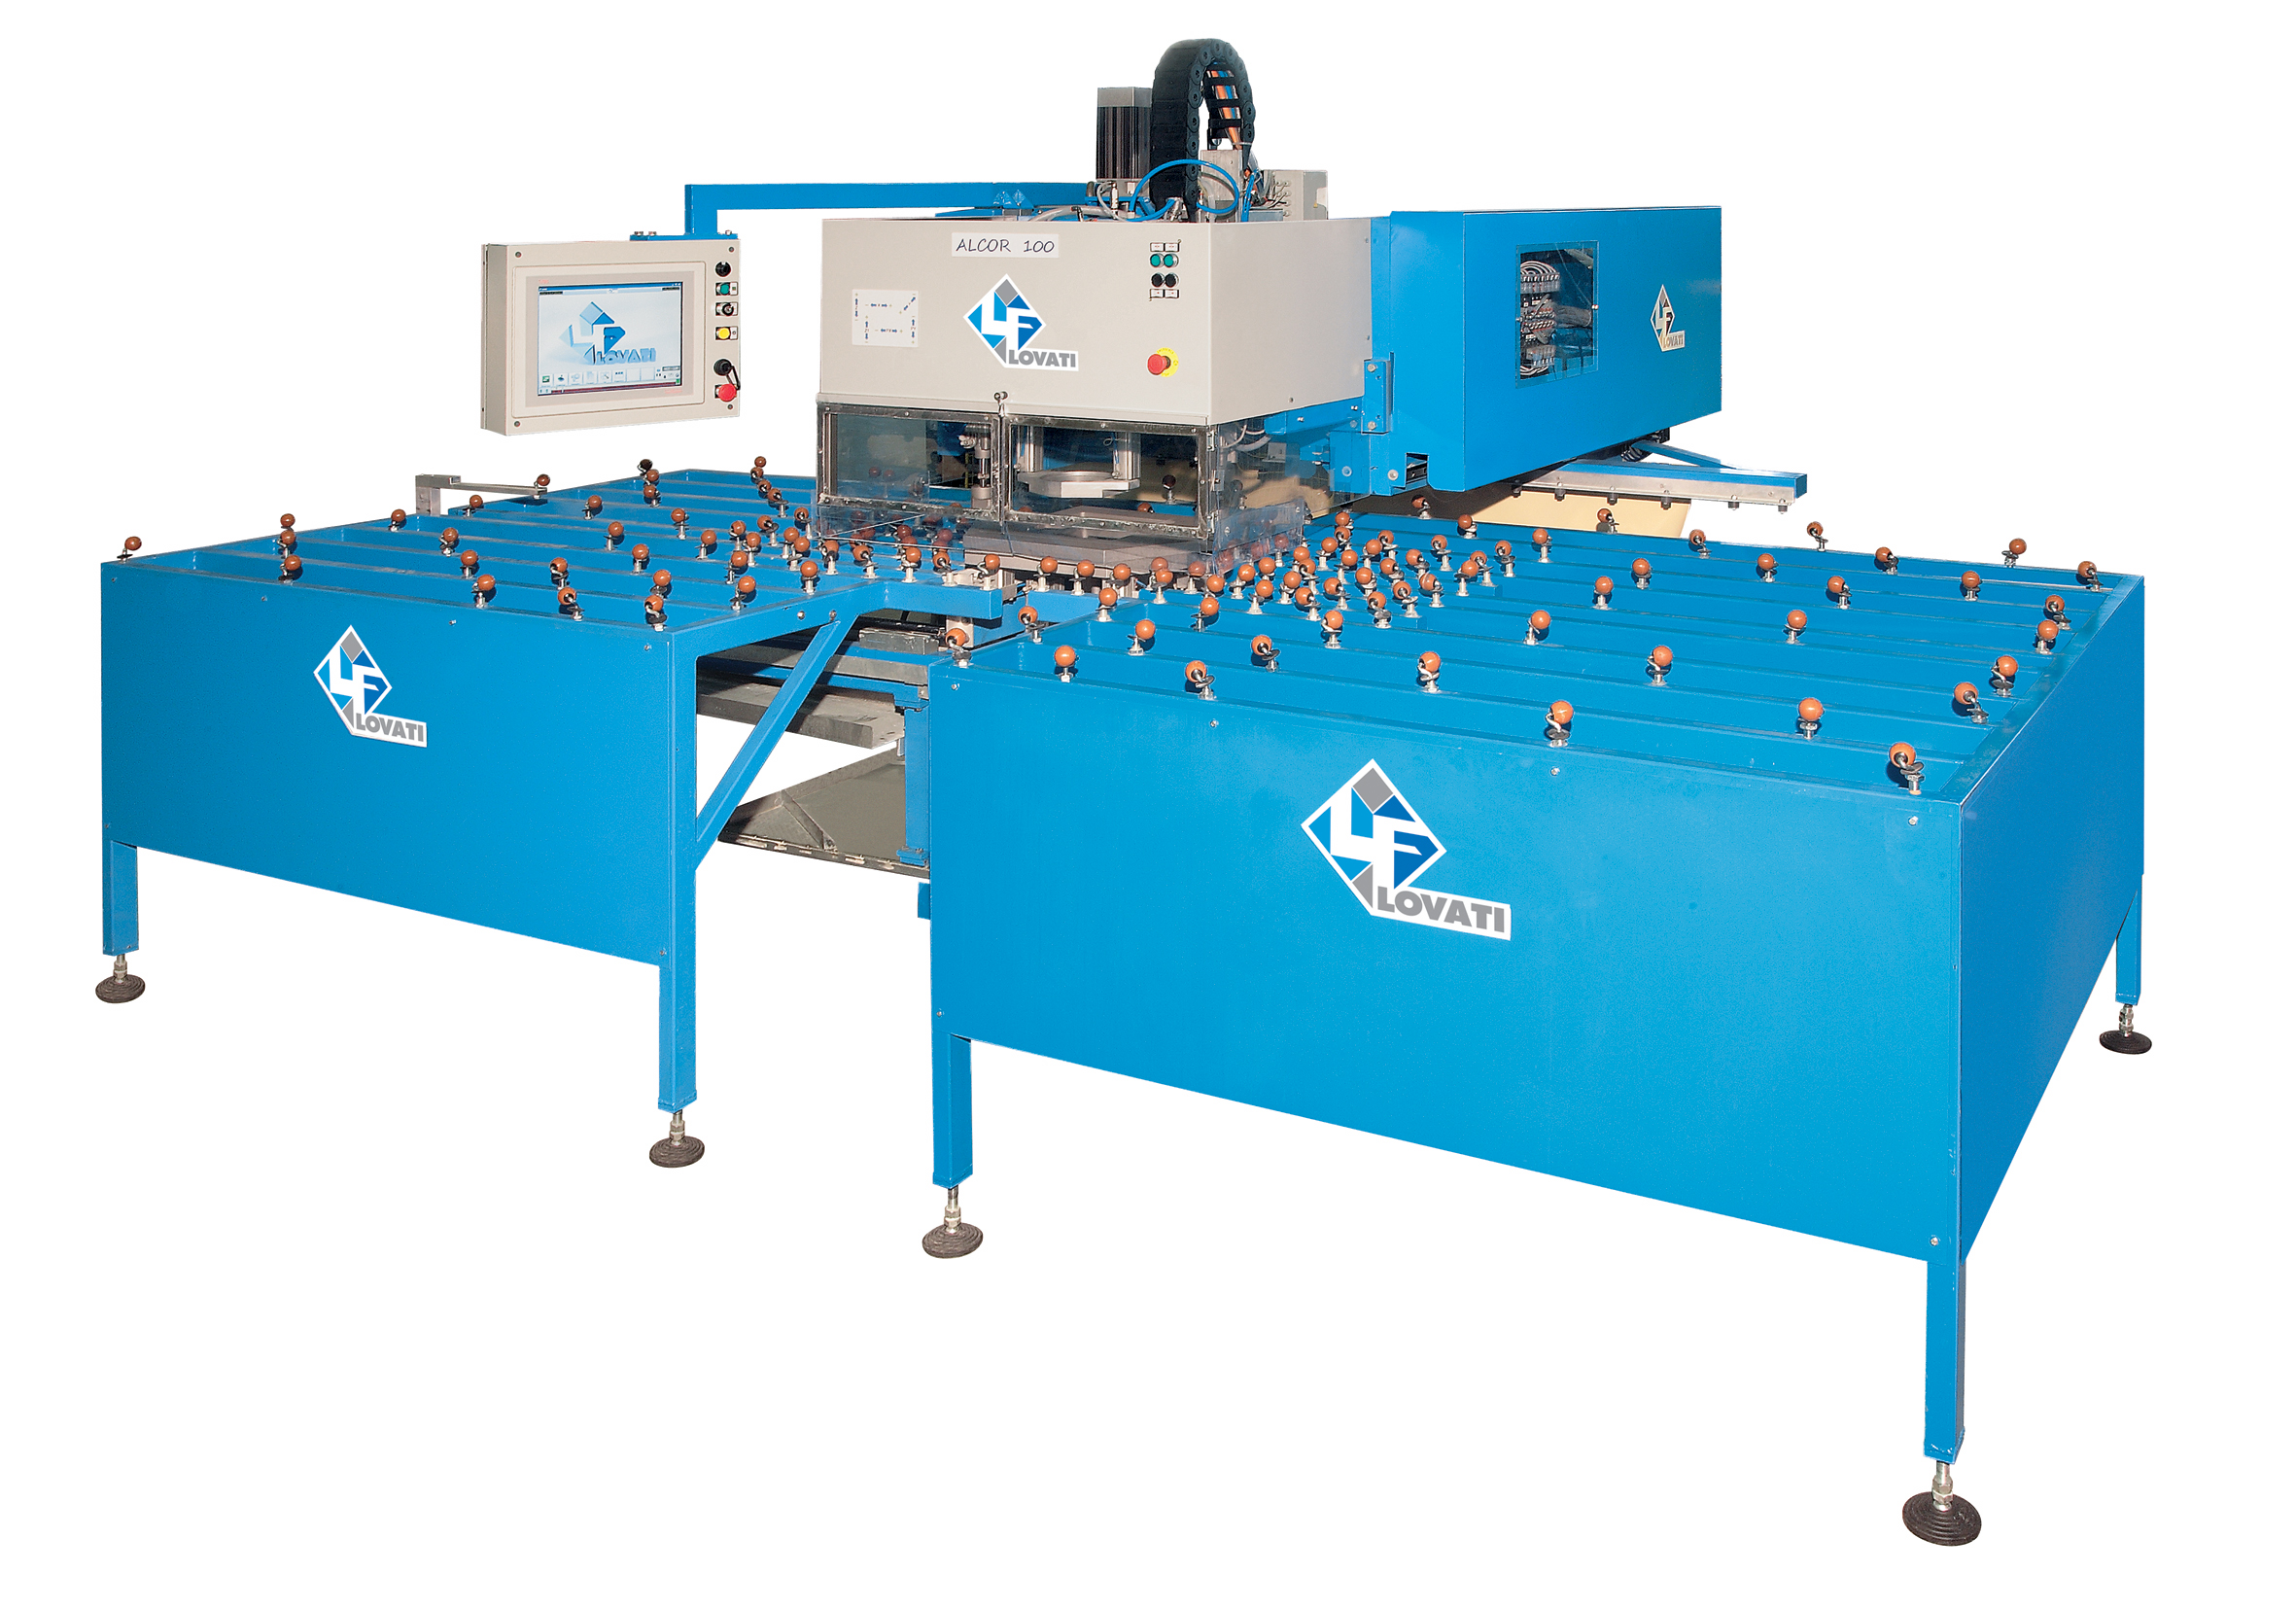 Alcor 100 - CNC for drilling, routing and corners